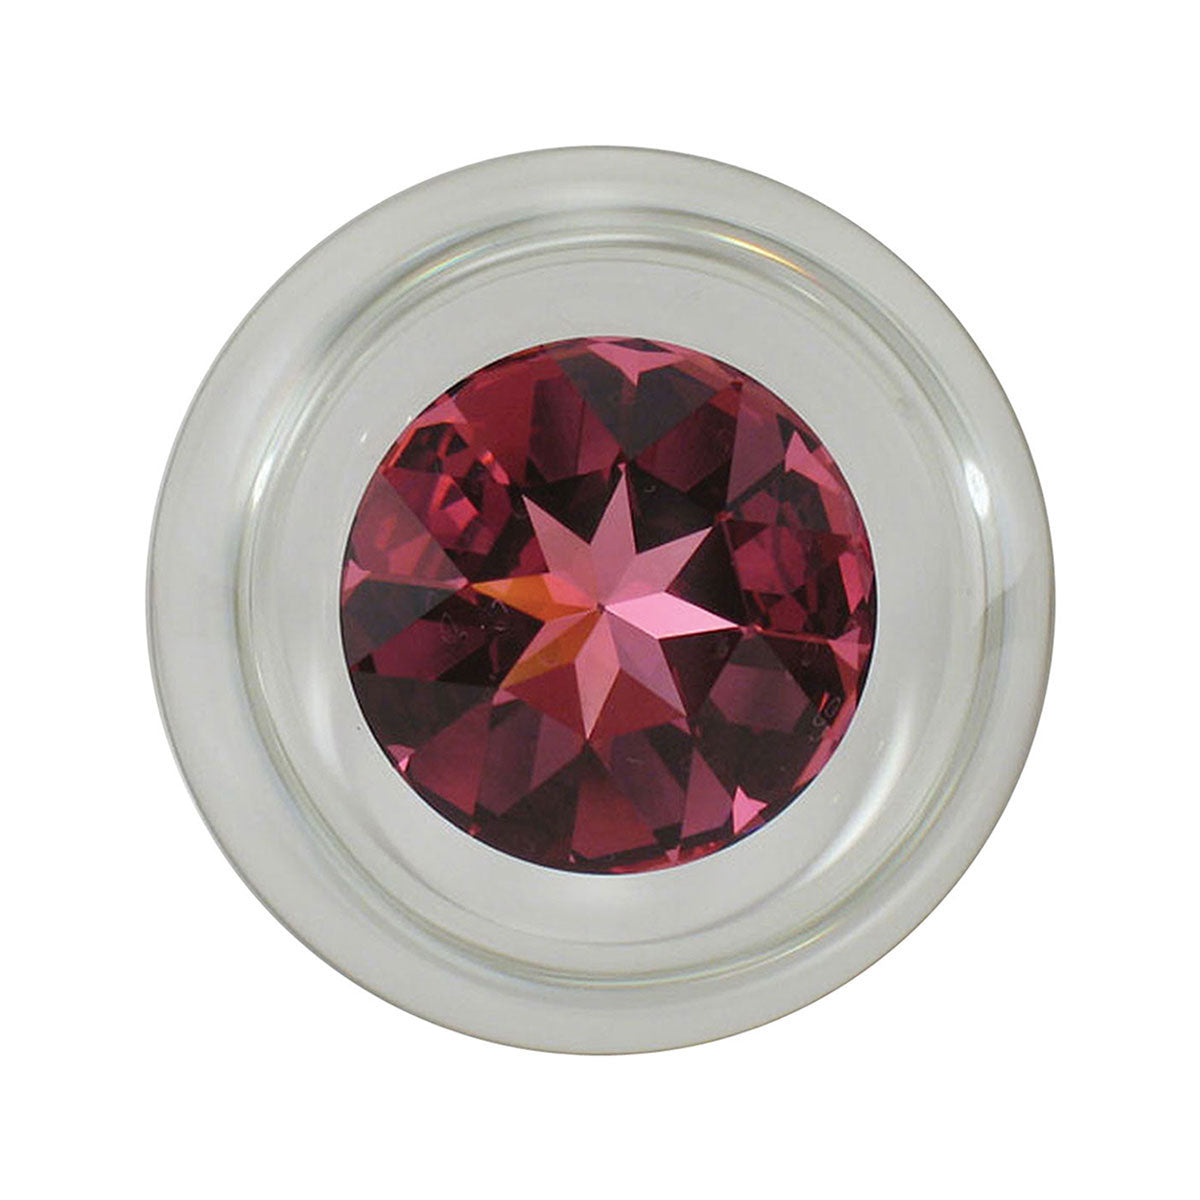 Crystal Delights Crystal Delight Small Clear Butt Plug Pink